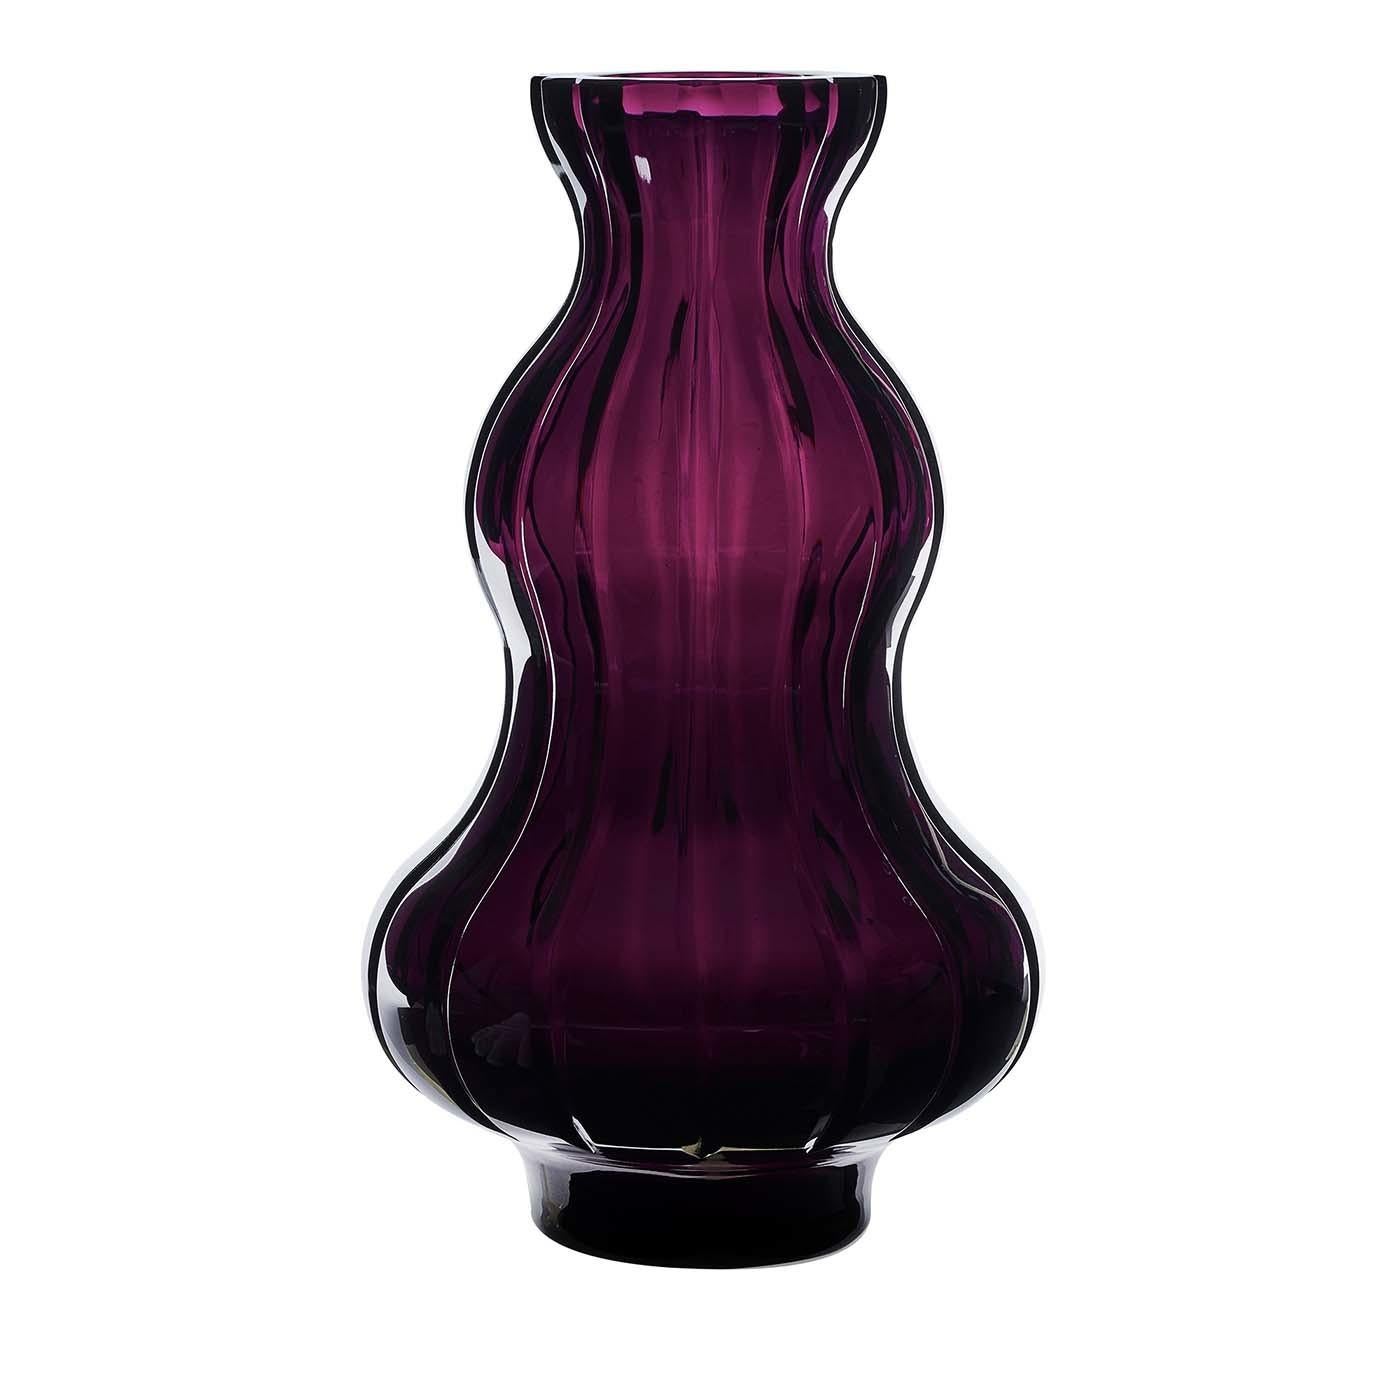 A hymn to love and its sublime tensions, this vase was crafted of crystal with a deep amethyst color. The sinuous curves of its silhouette are enclosed in a transparent layer with vertical grooves that create a contrast and adds to the complexity of